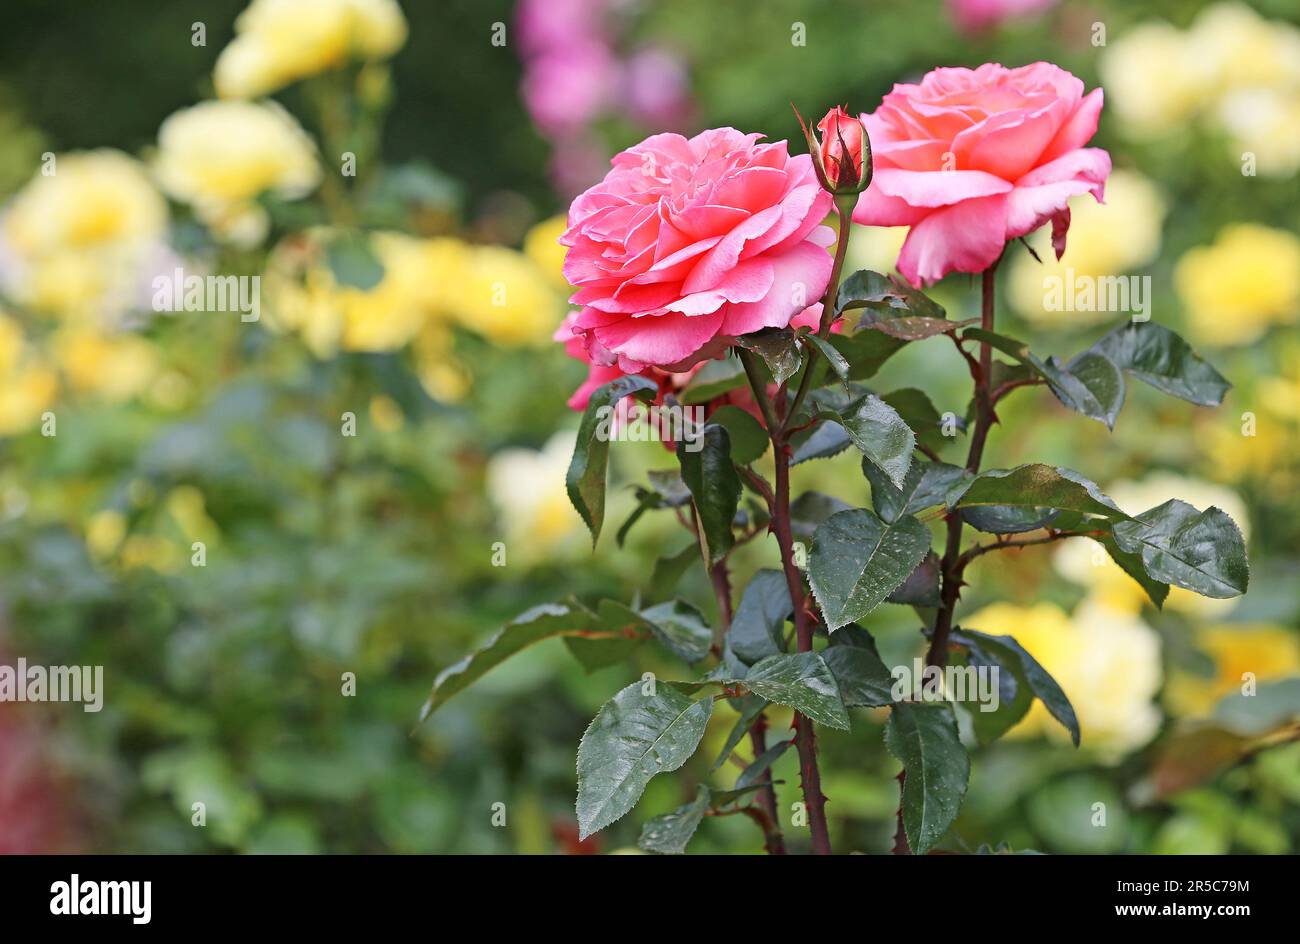 Pink Roses Stock Photo